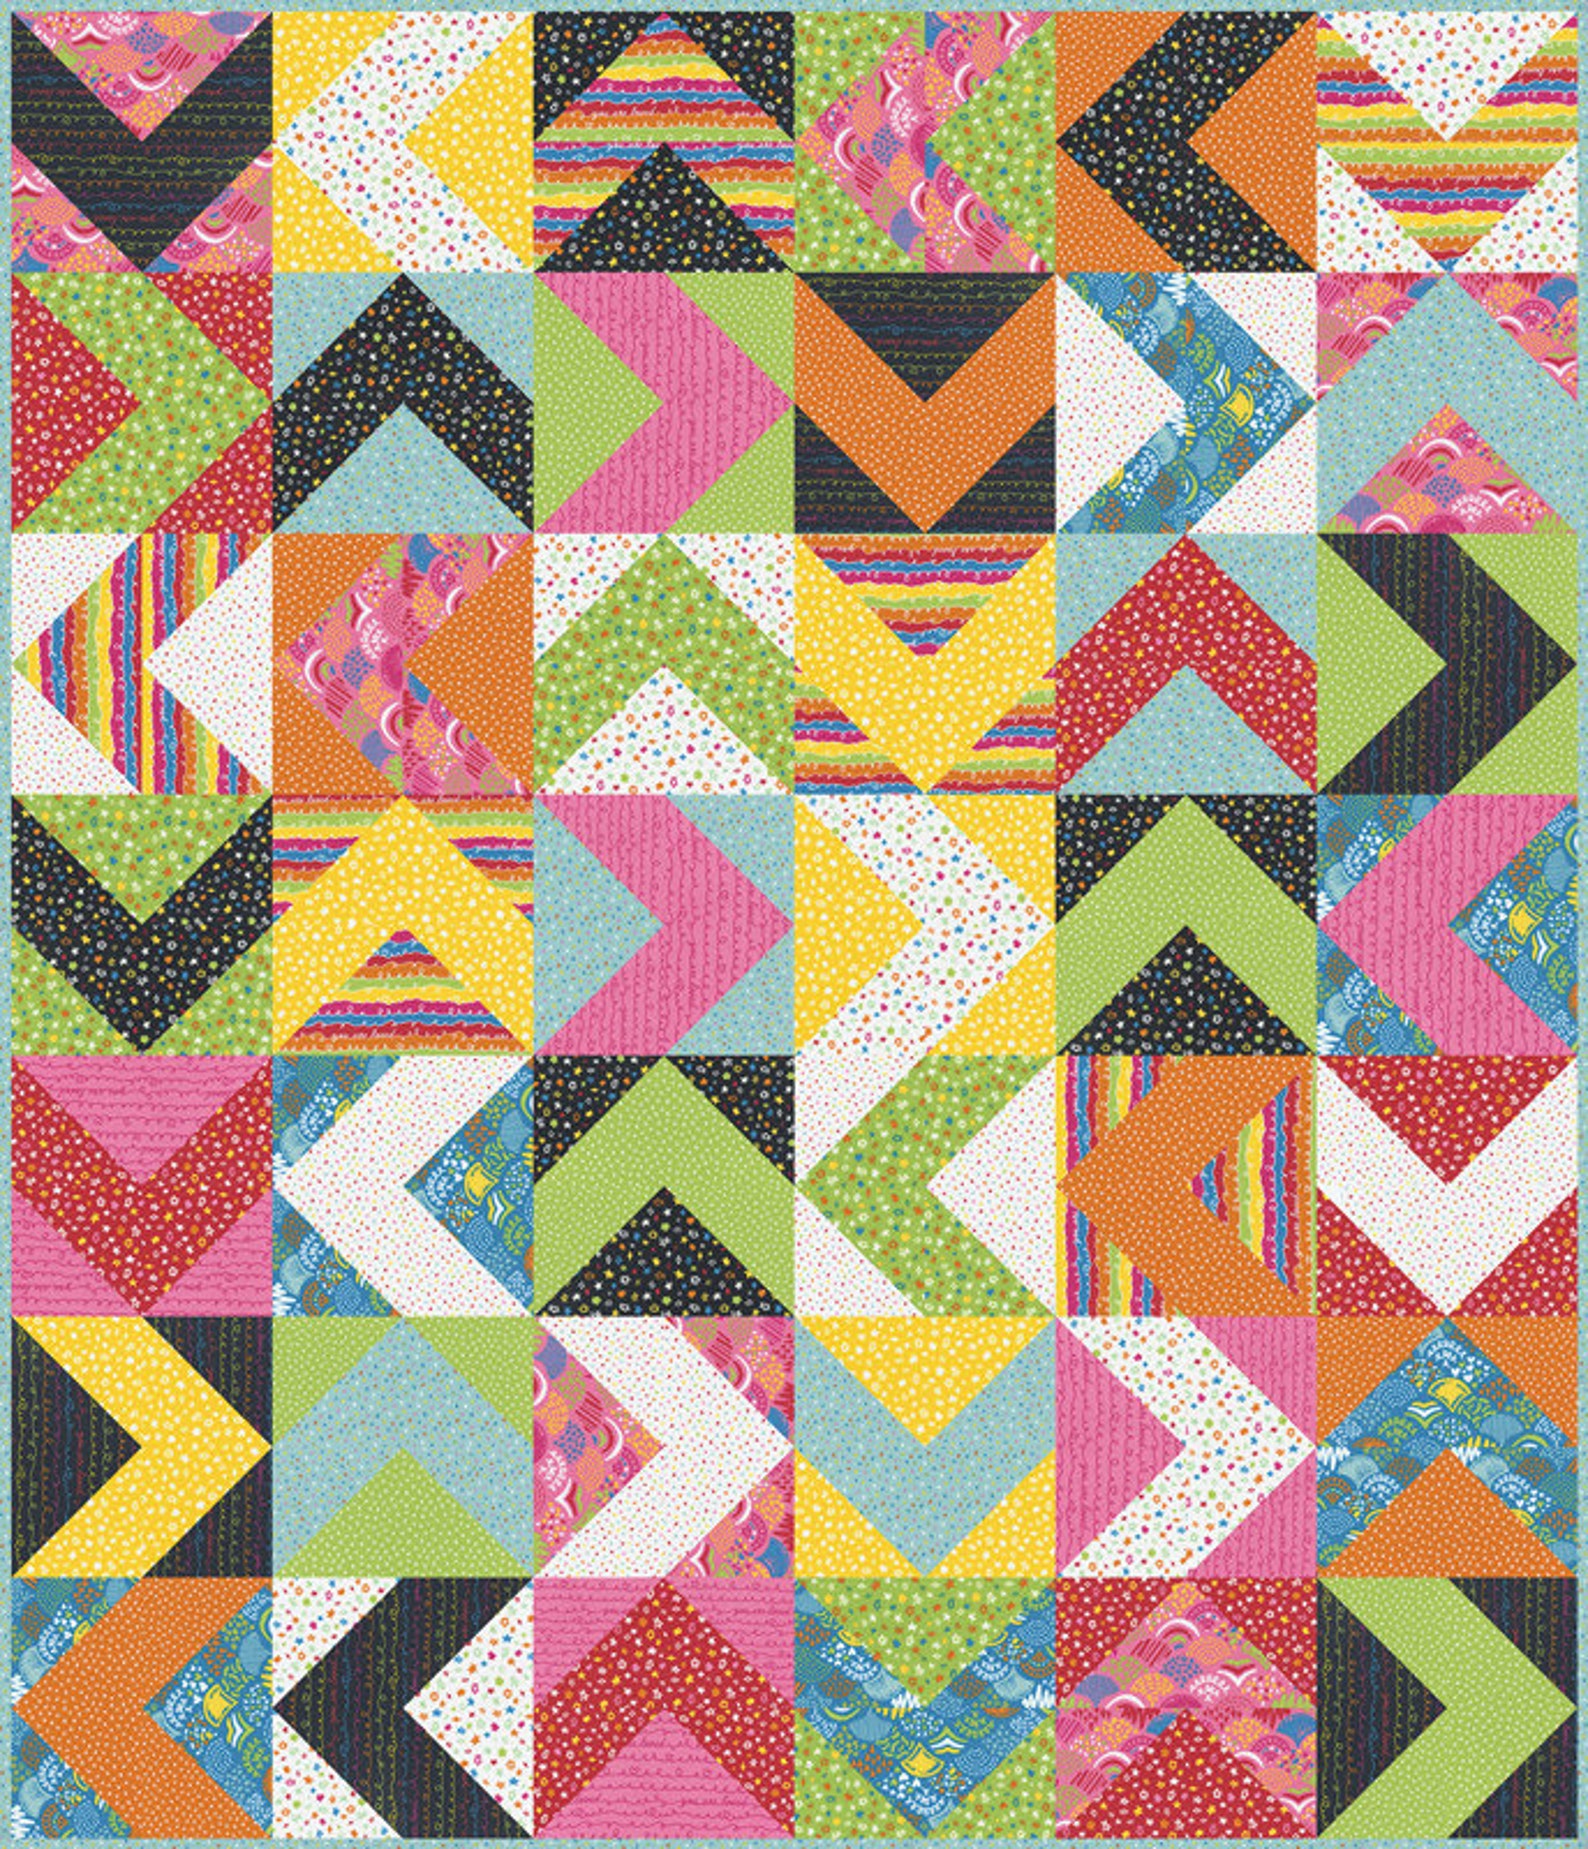 Find Your Path Quilt Kit Creativity Shell Moda IN STOCK - Etsy